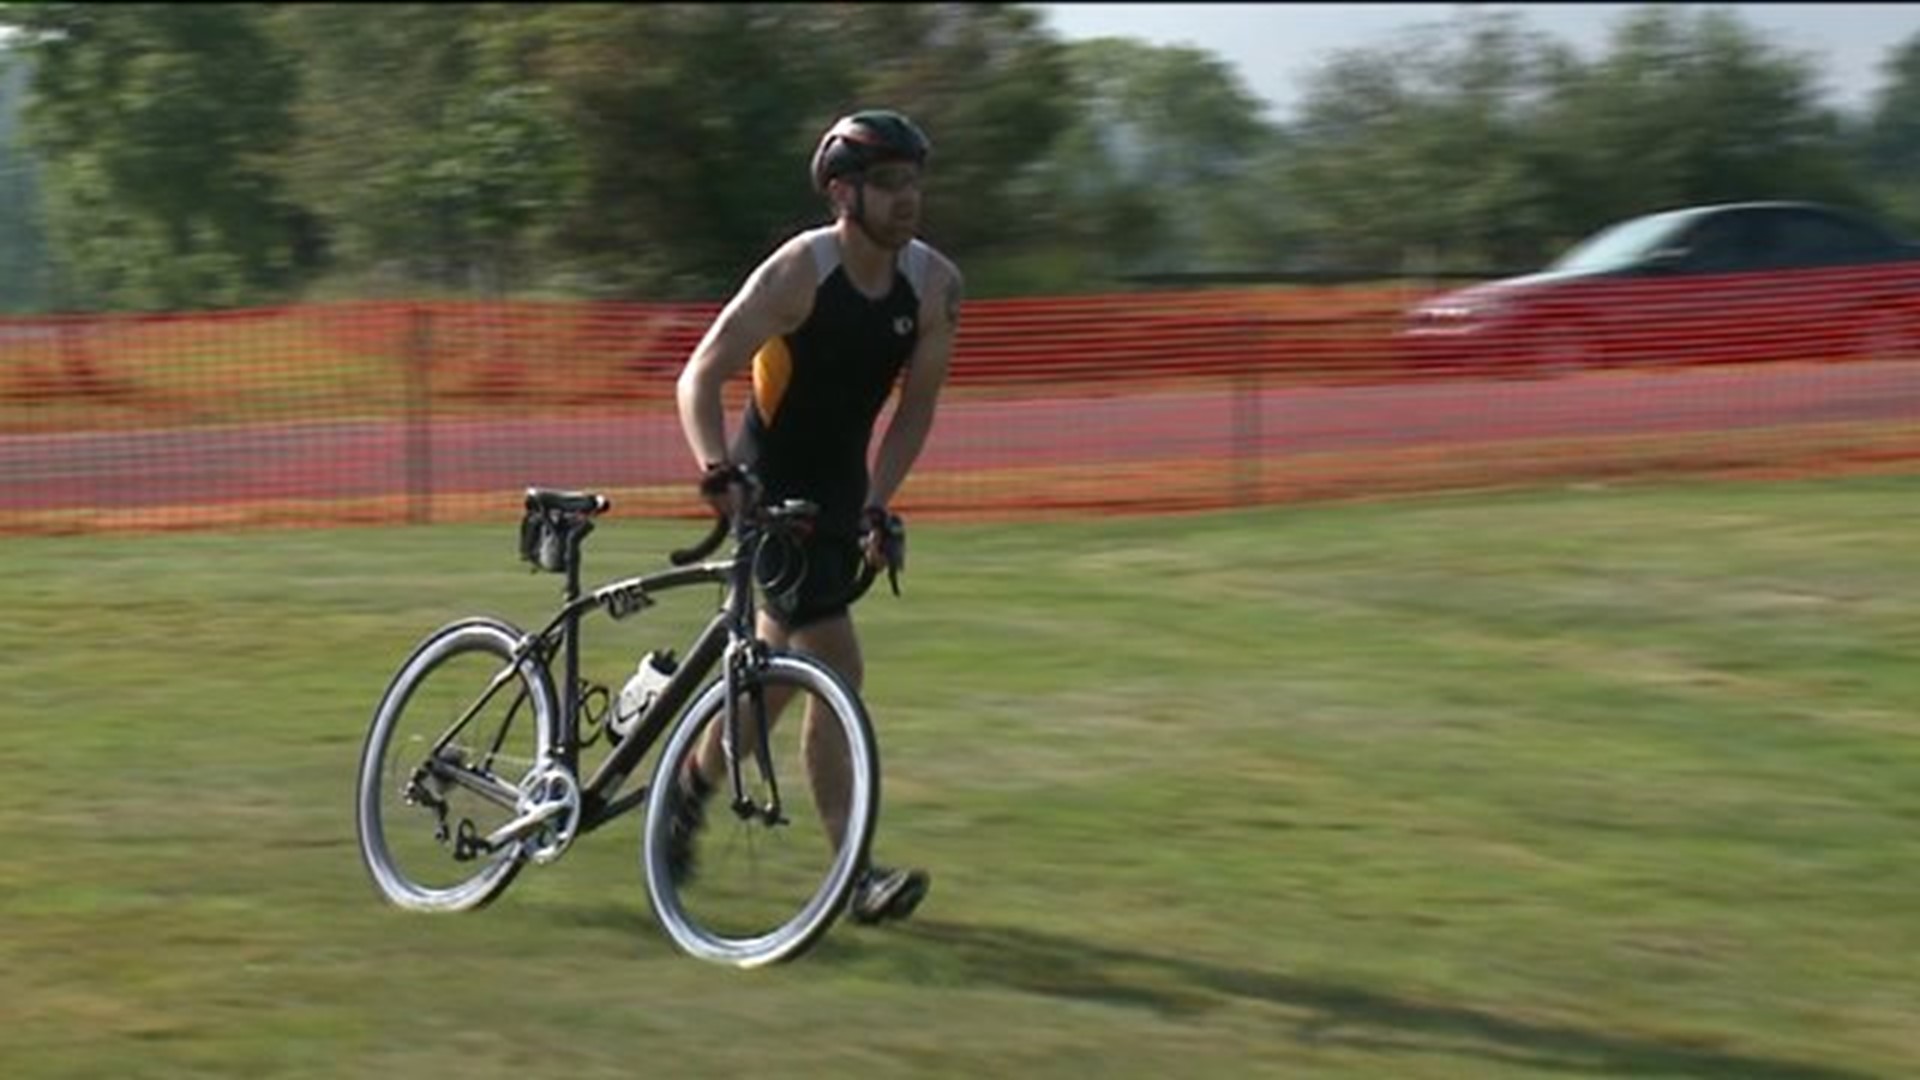 Over 400 Athletes Take Part in Annual Triathlon